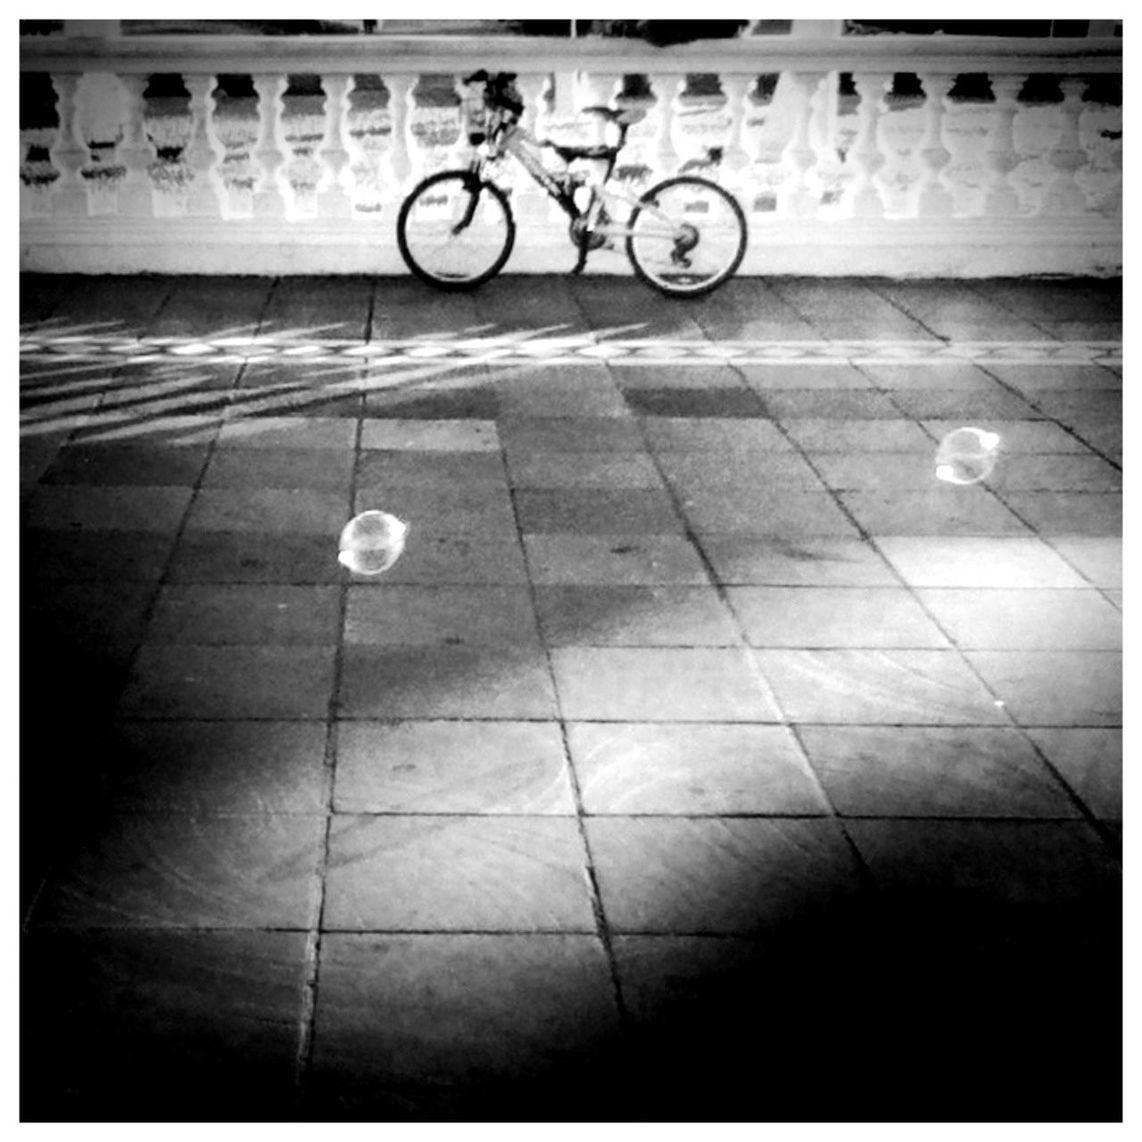 transfer print, auto post production filter, tiled floor, transportation, flooring, street, paving stone, bicycle, shadow, indoors, sidewalk, cobblestone, pavement, high angle view, empty, sunlight, reflection, travel, tile